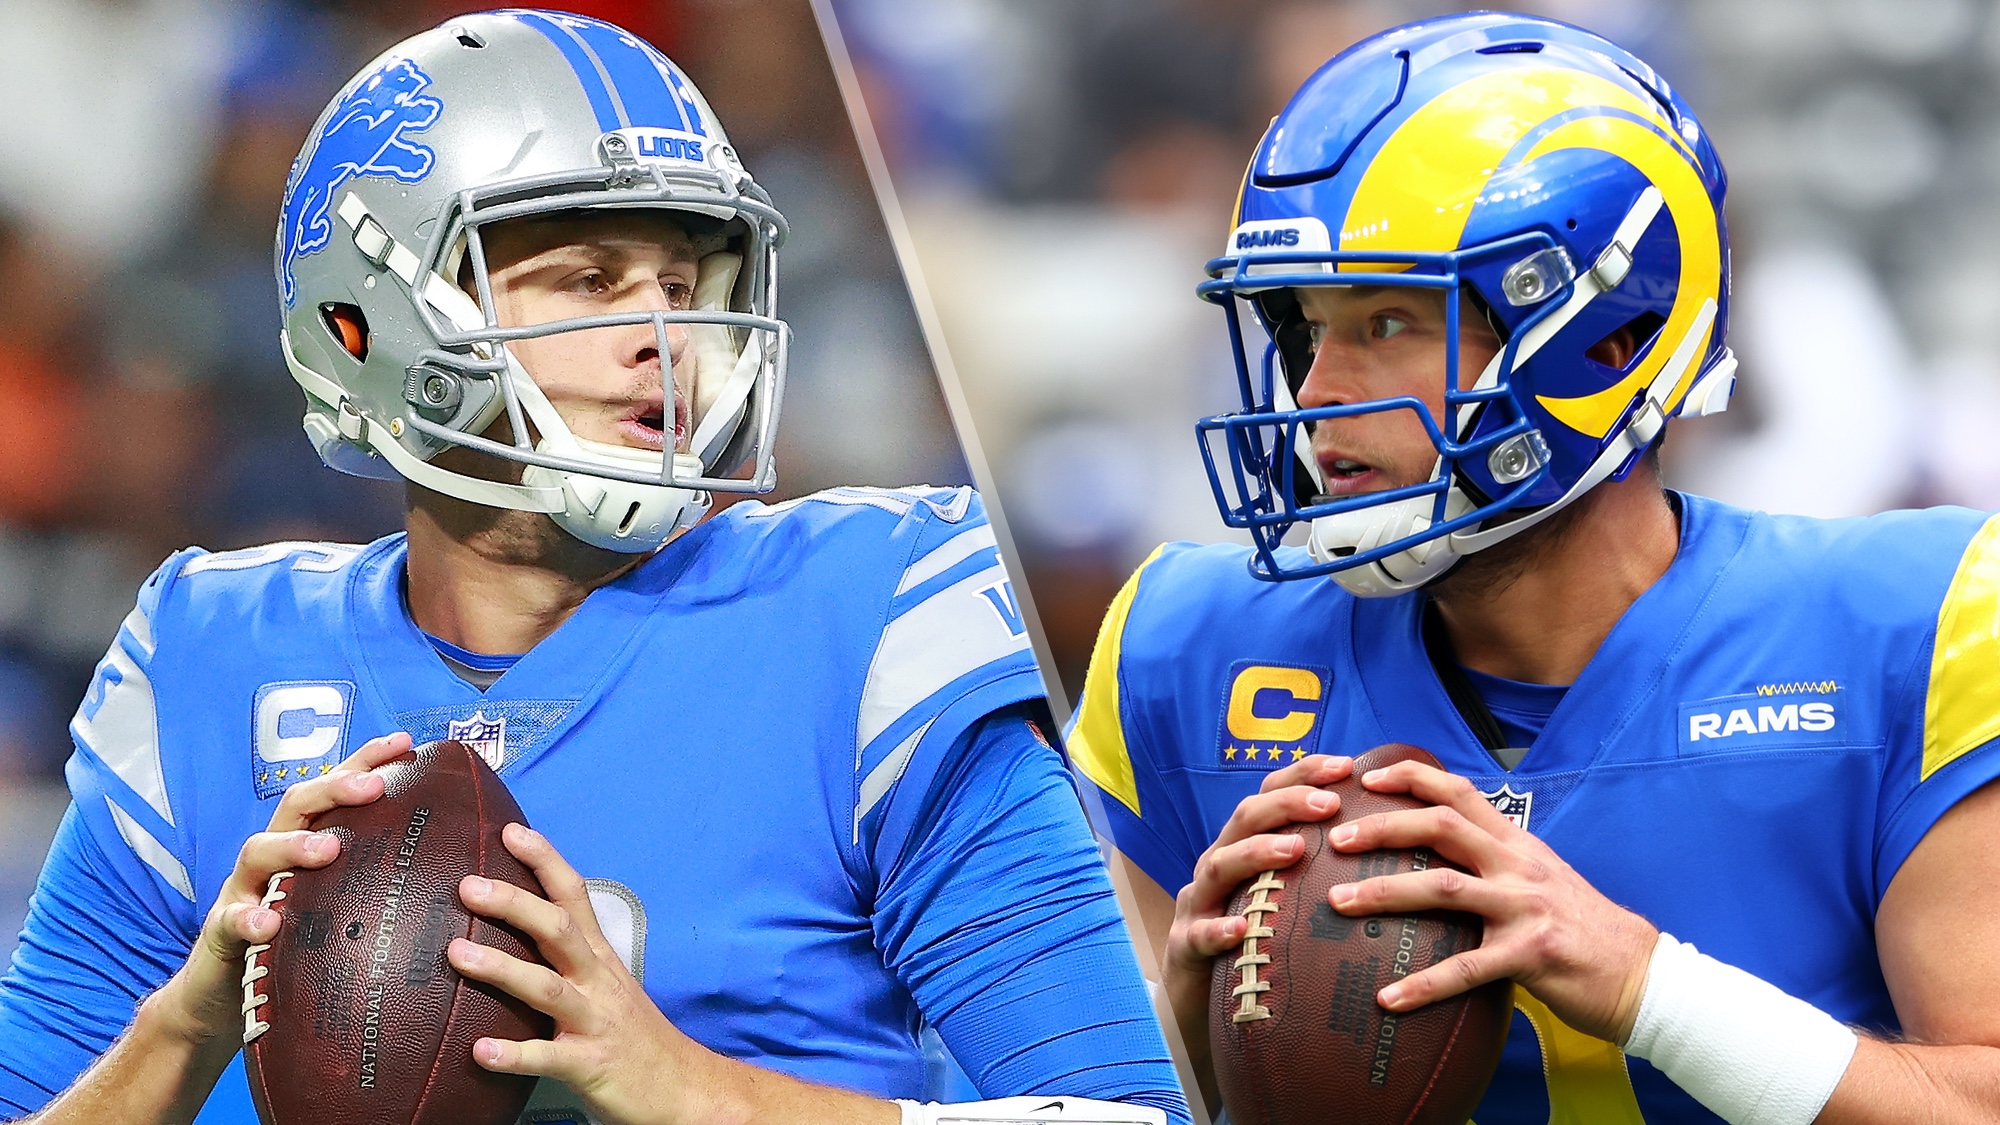 Lions vs Rams live stream is here How to watch NFL Week 7 game online